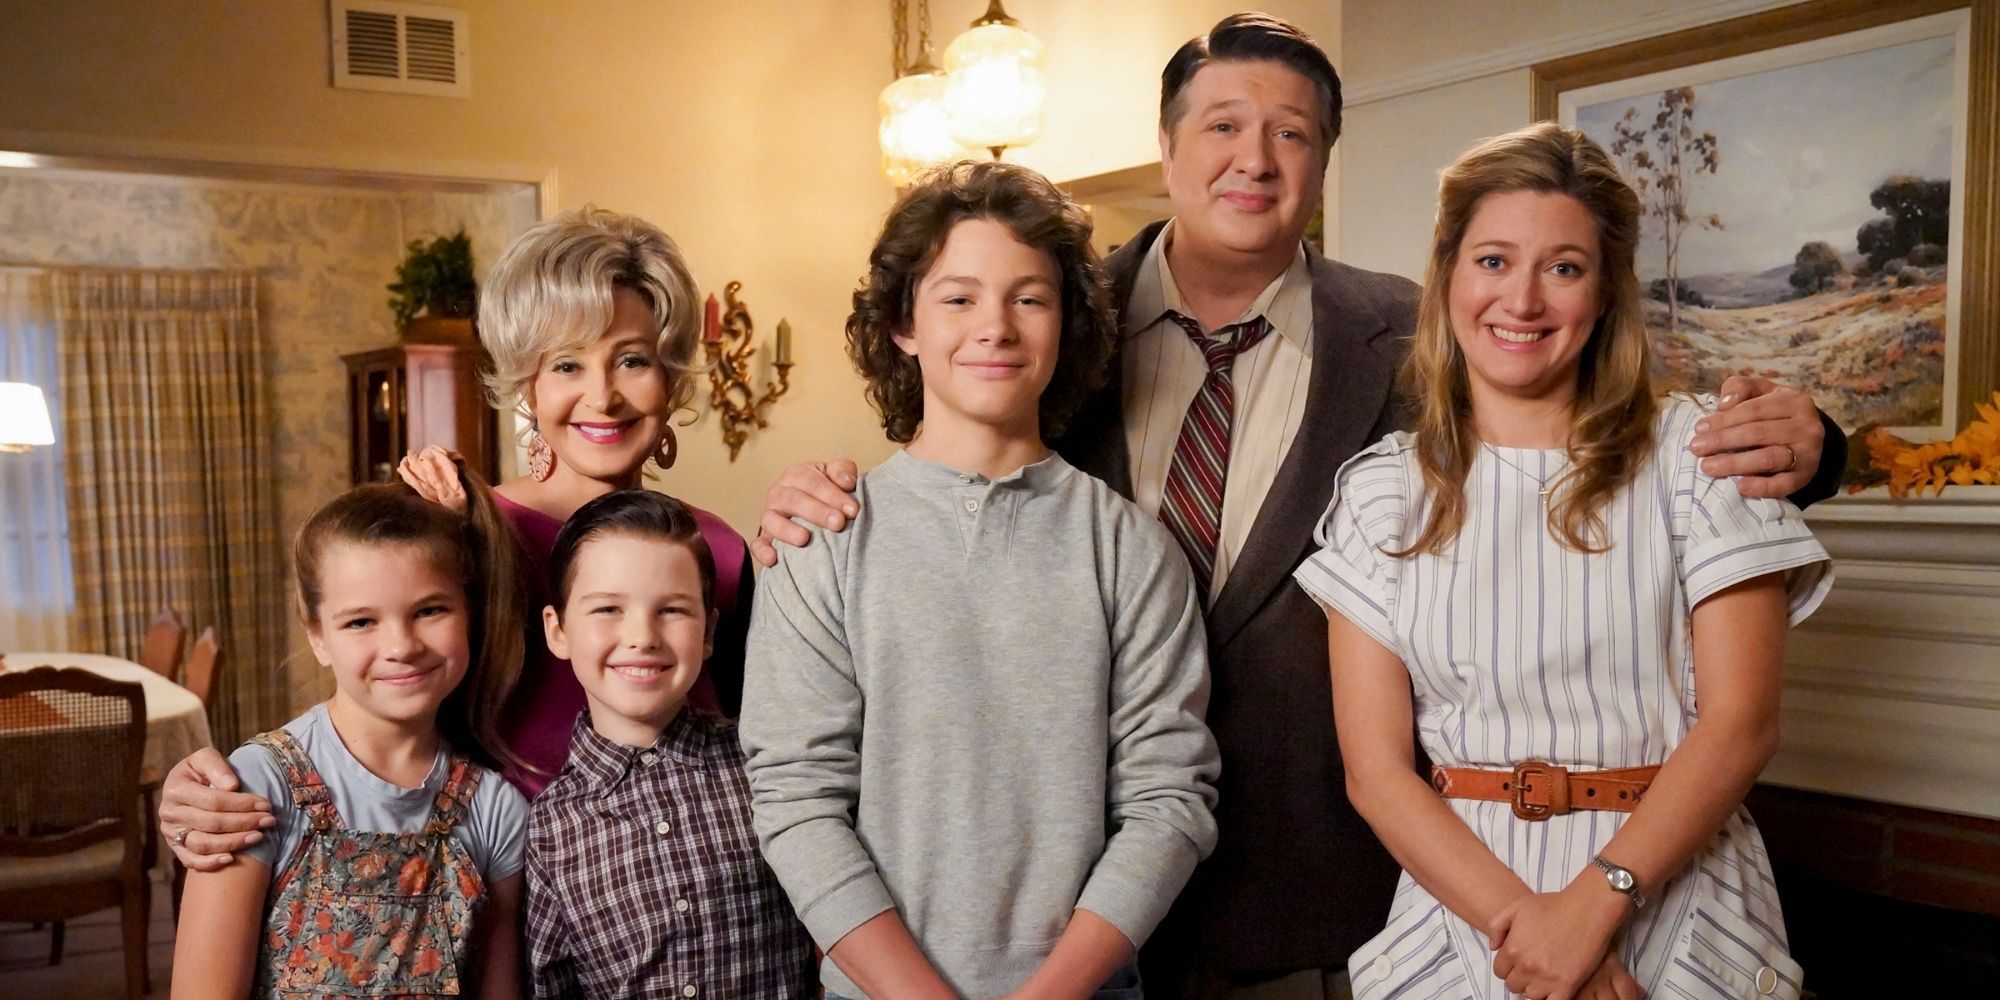 The Cooper family from Young Sheldon standing together